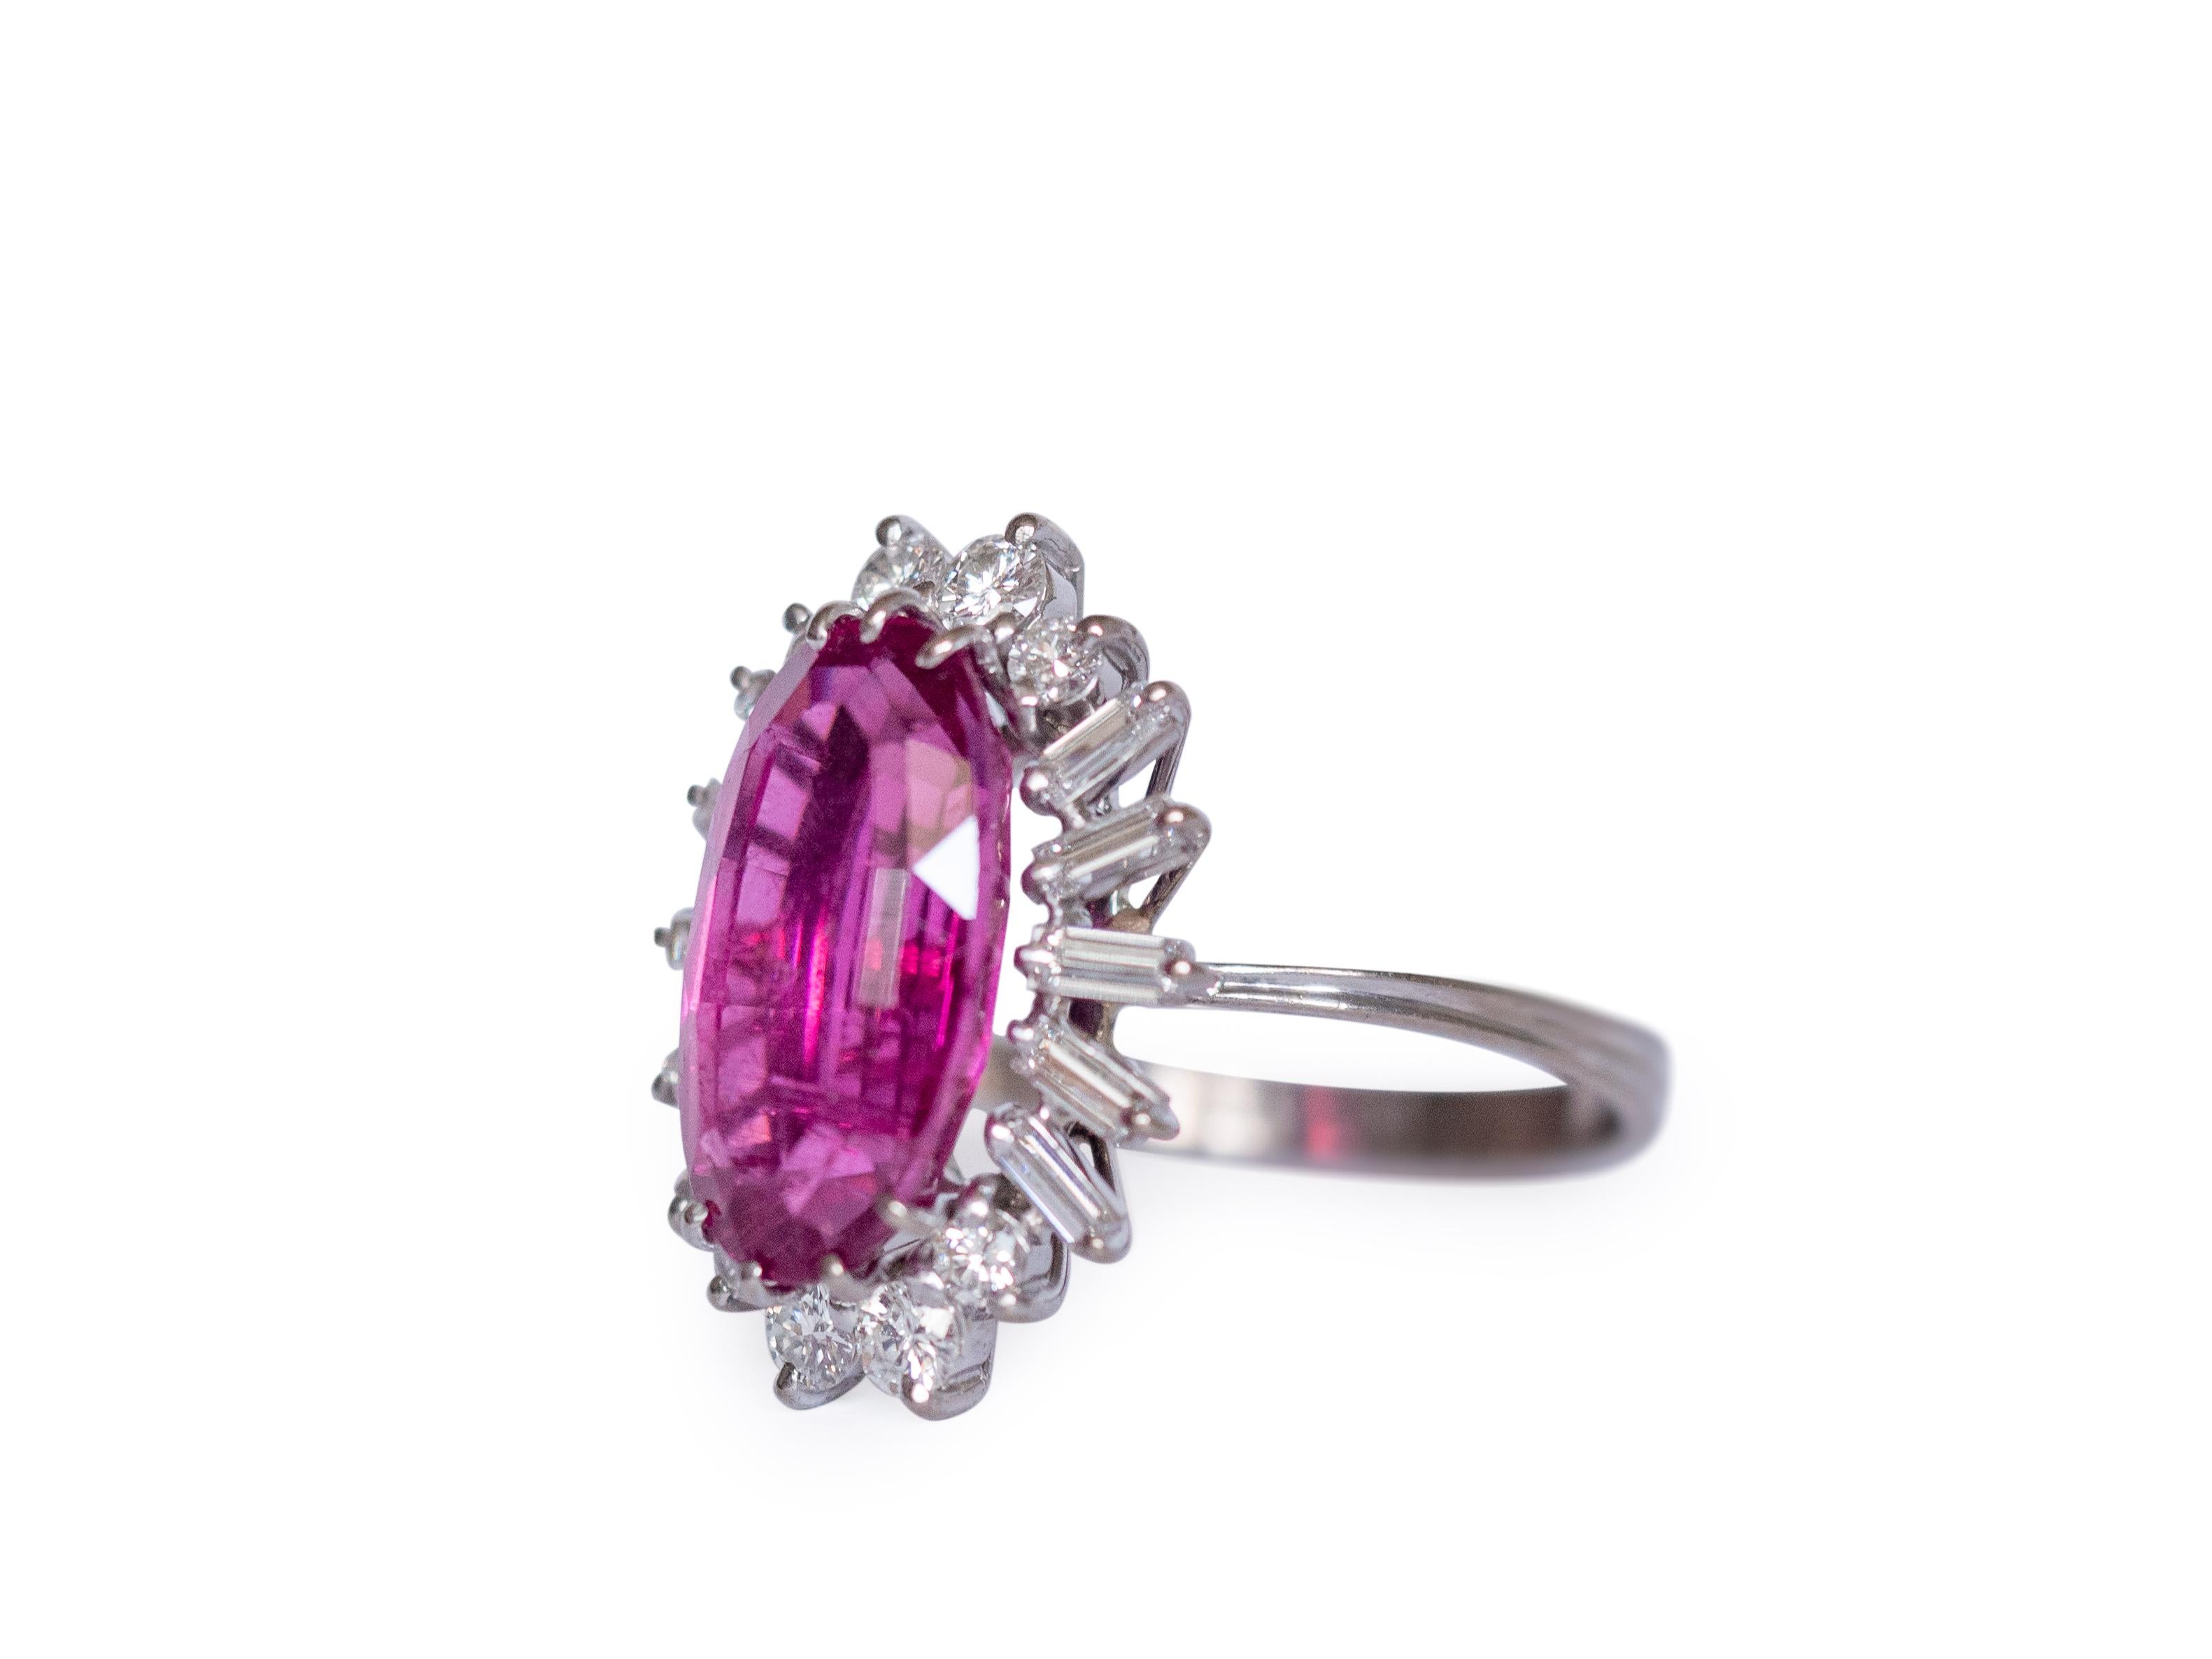 Ring Size: 8
Metal Type: 18K White Gold [Hallmarked, and Tested]
Weight:  6.5 grams

Center Stone Details:
GIA REPORT#2215041210
Type: Tourmaline, Natural
Weight: Approximately 6.00 carat
Cut: Oval Mixed Brilliant
Color: Purple/Pink


Side Diamond